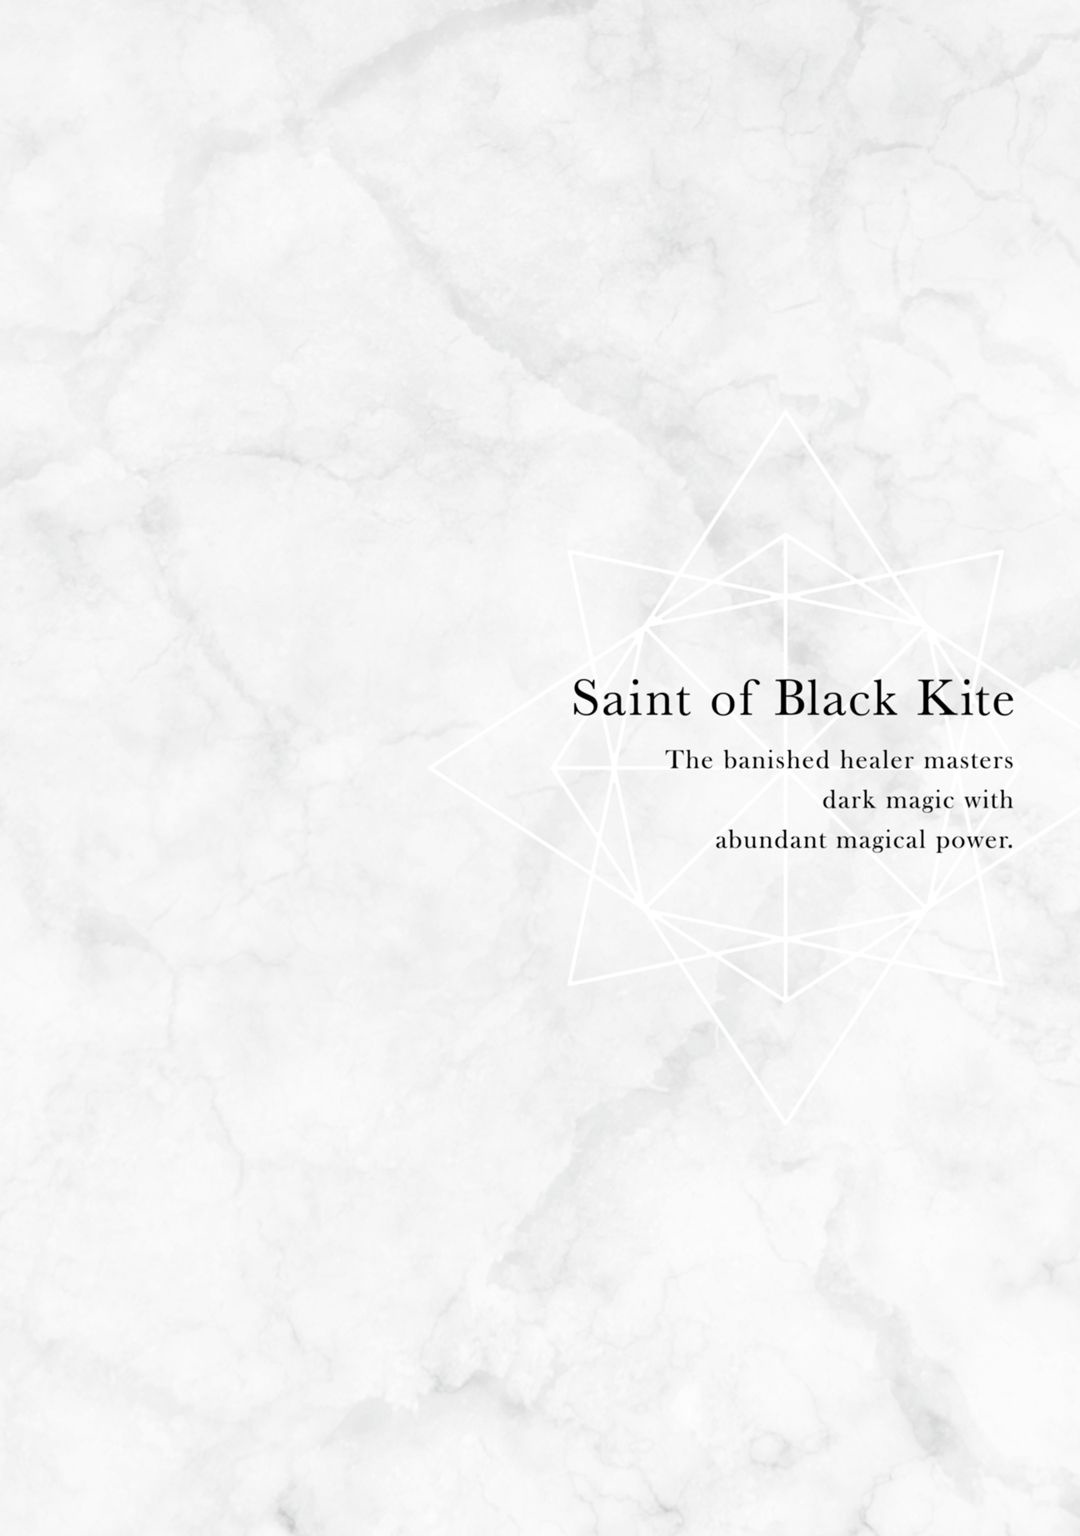 Saint Of Black Kite ~The Banished Healer Masters Dark Magic With Abundant Magical Power~ Chapter 11: The More Mundane The Daily Routine, The Greater The Small Sense Of Discomfort. - Picture 2